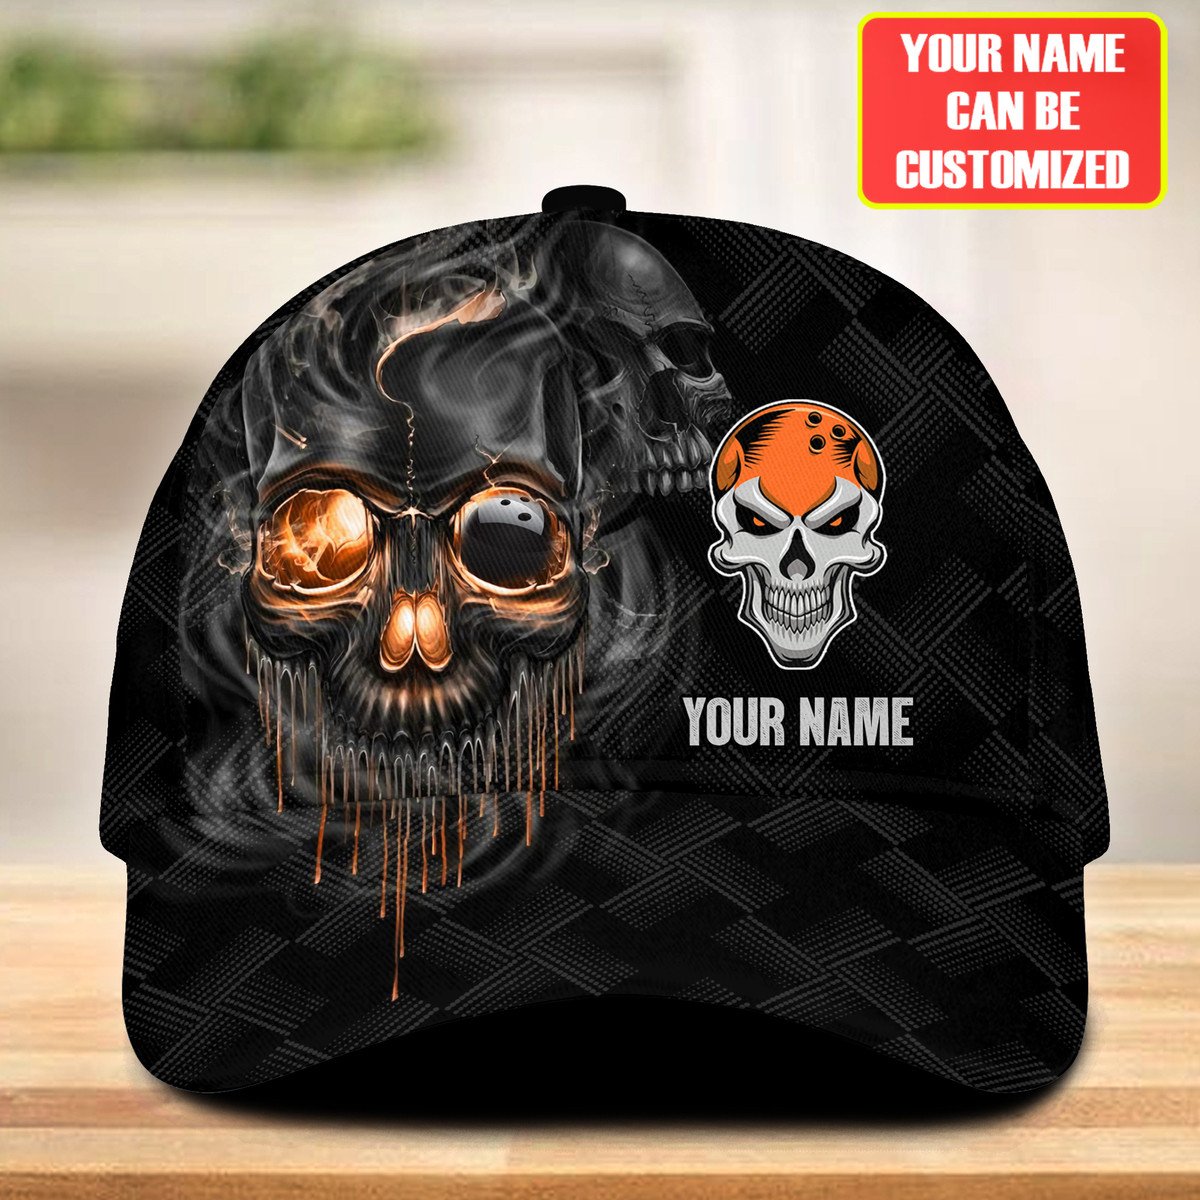 Personalized Name Multi Color Skull Bowling Classic Cap/ Skull Smoke Bowling Cap for Bowler/ Gift for Bowling Lover